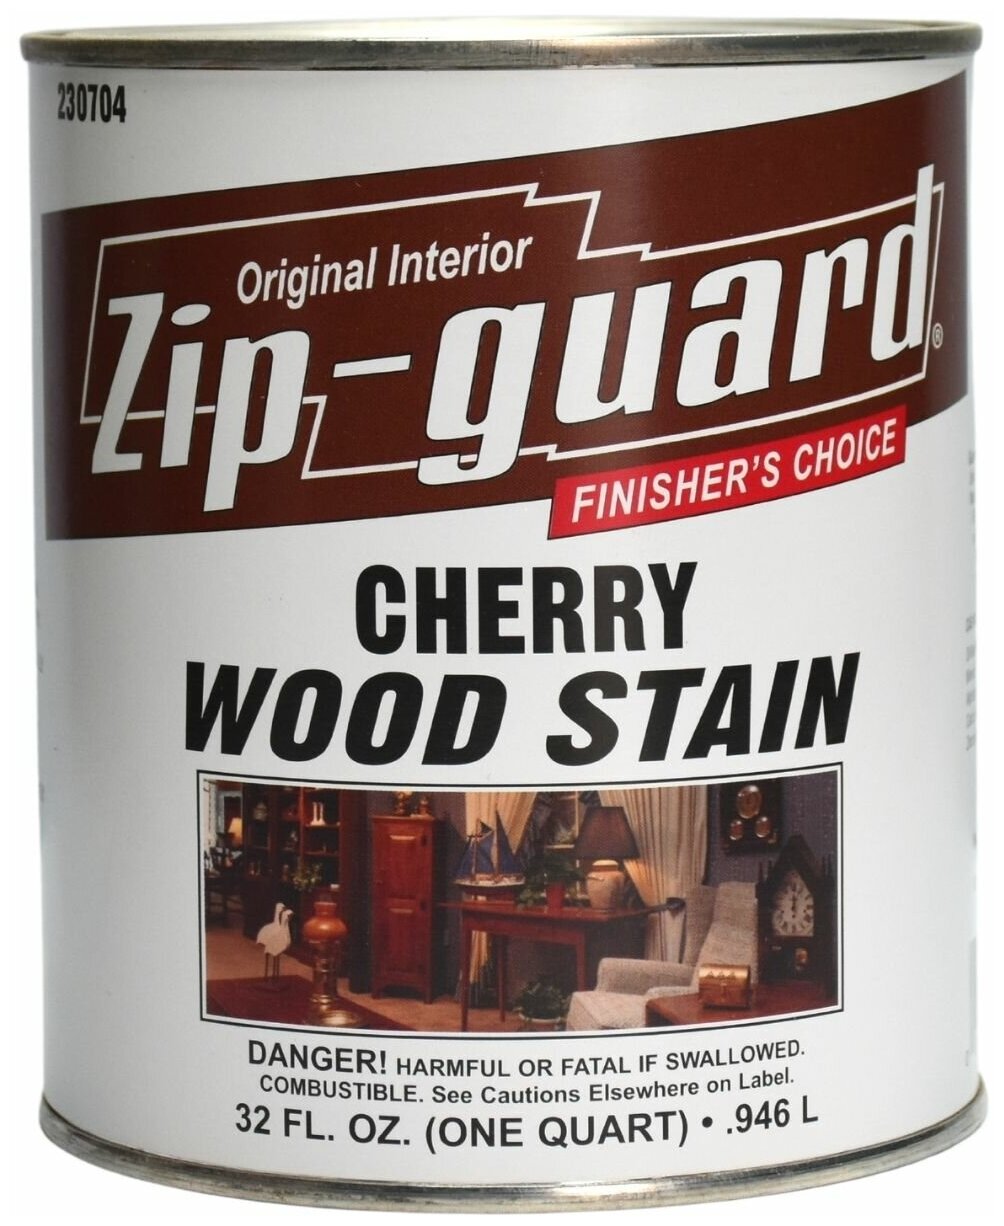 Морилка масляная Zip-Guard Oil-Based Wood Stain